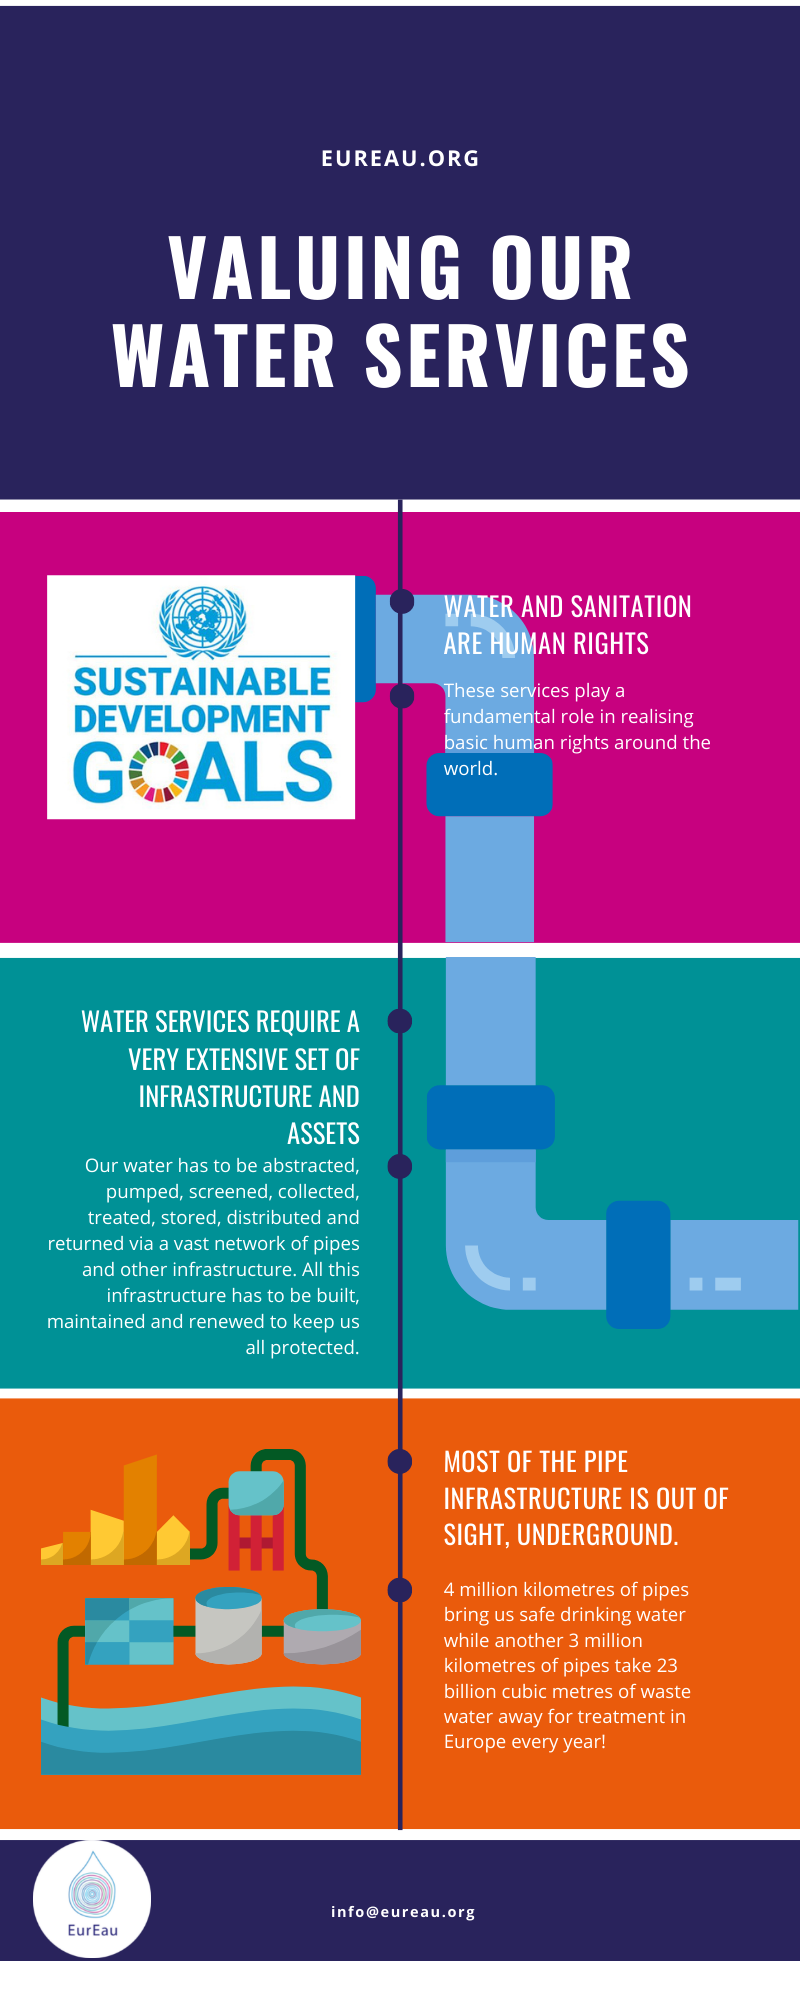 Valuing our Water Services - infographic